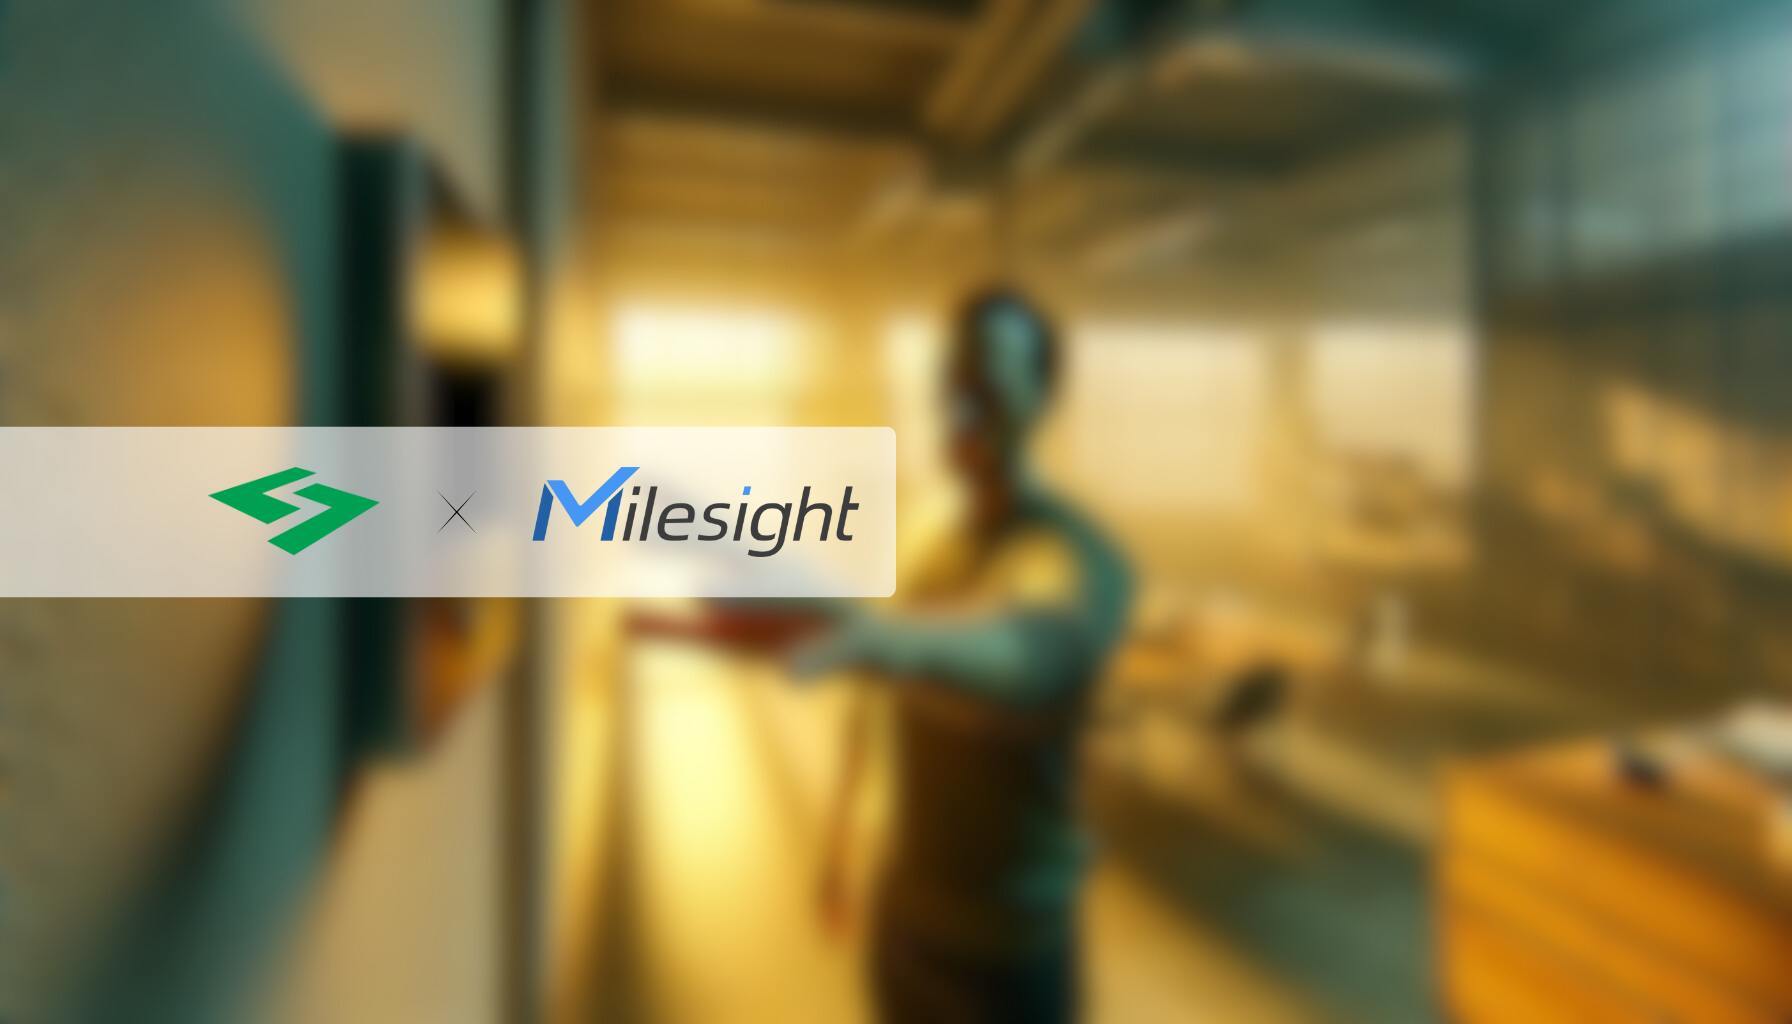 Connect your Milesight devices to Sensgreen Smart Building Platform 